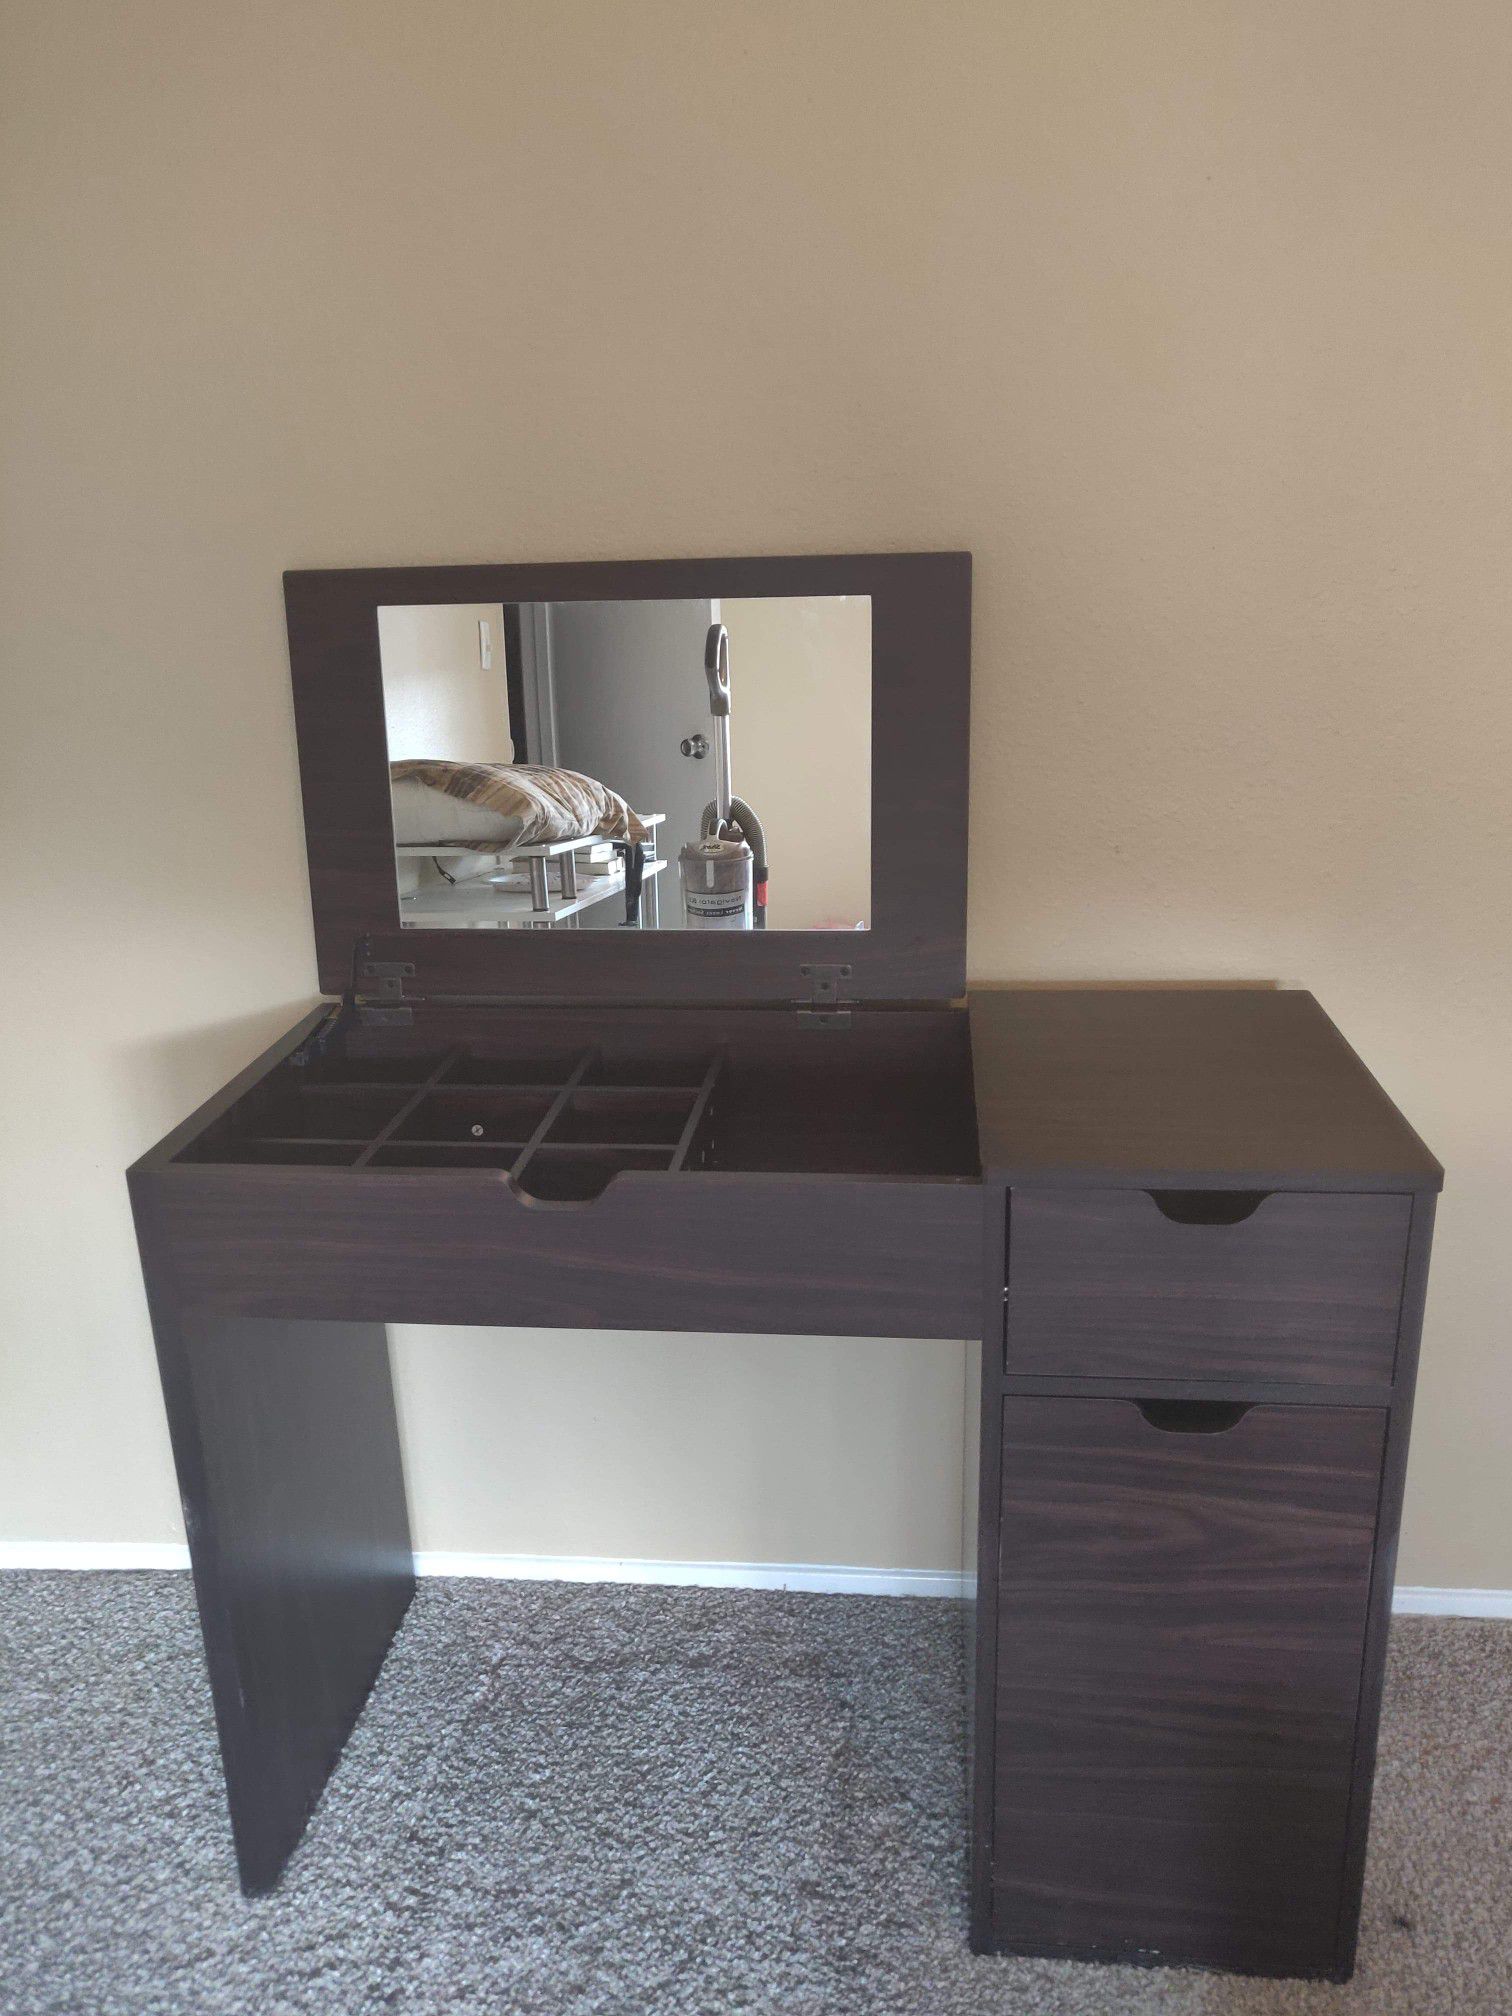 Vanity with mirror and chair